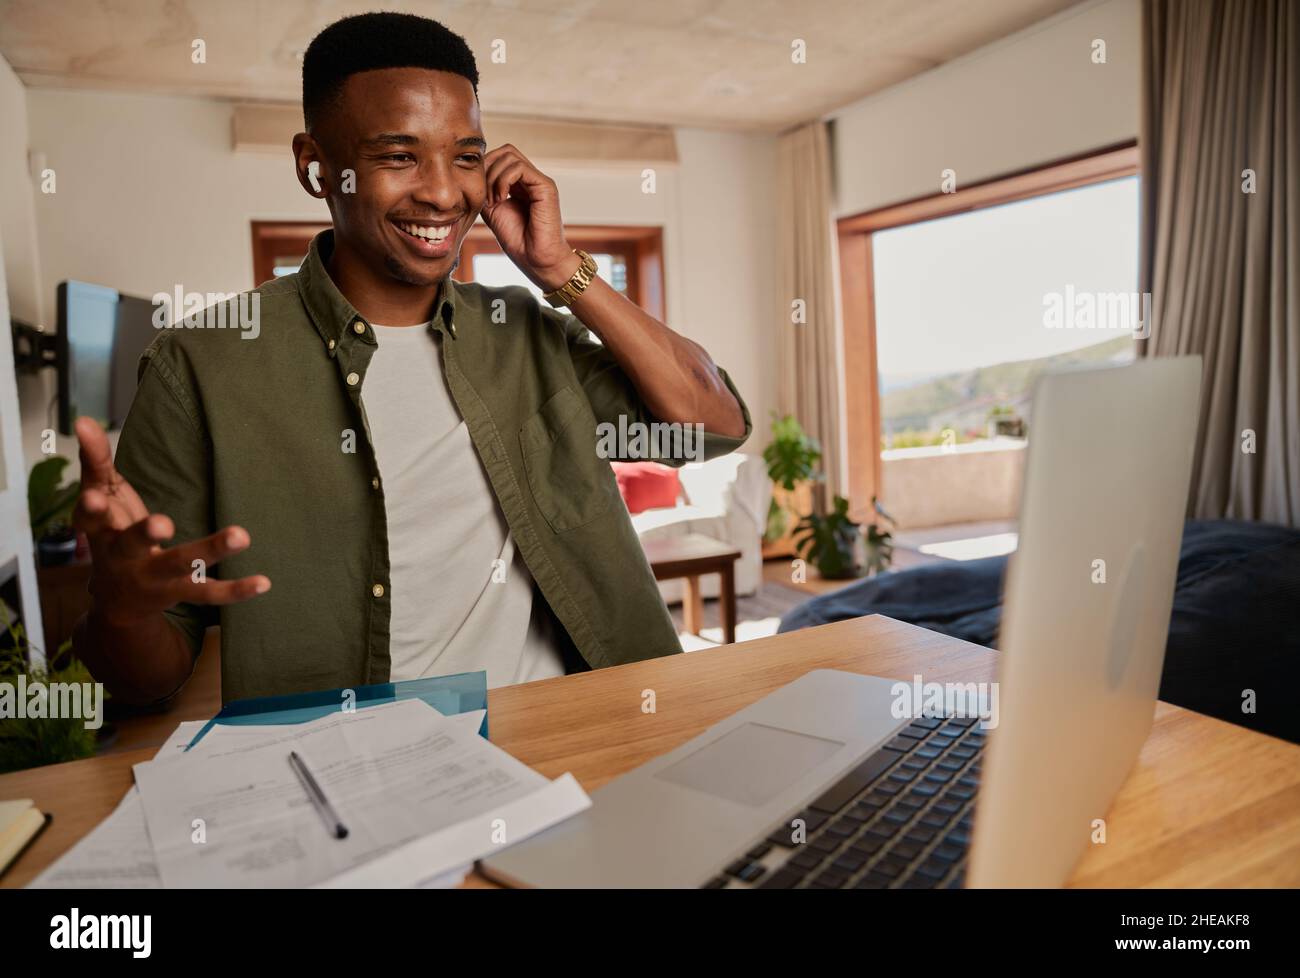 Young adult black male adjusting earphones while talking in online meeting. Sitting at kitchen counter using laptop. Stock Photo